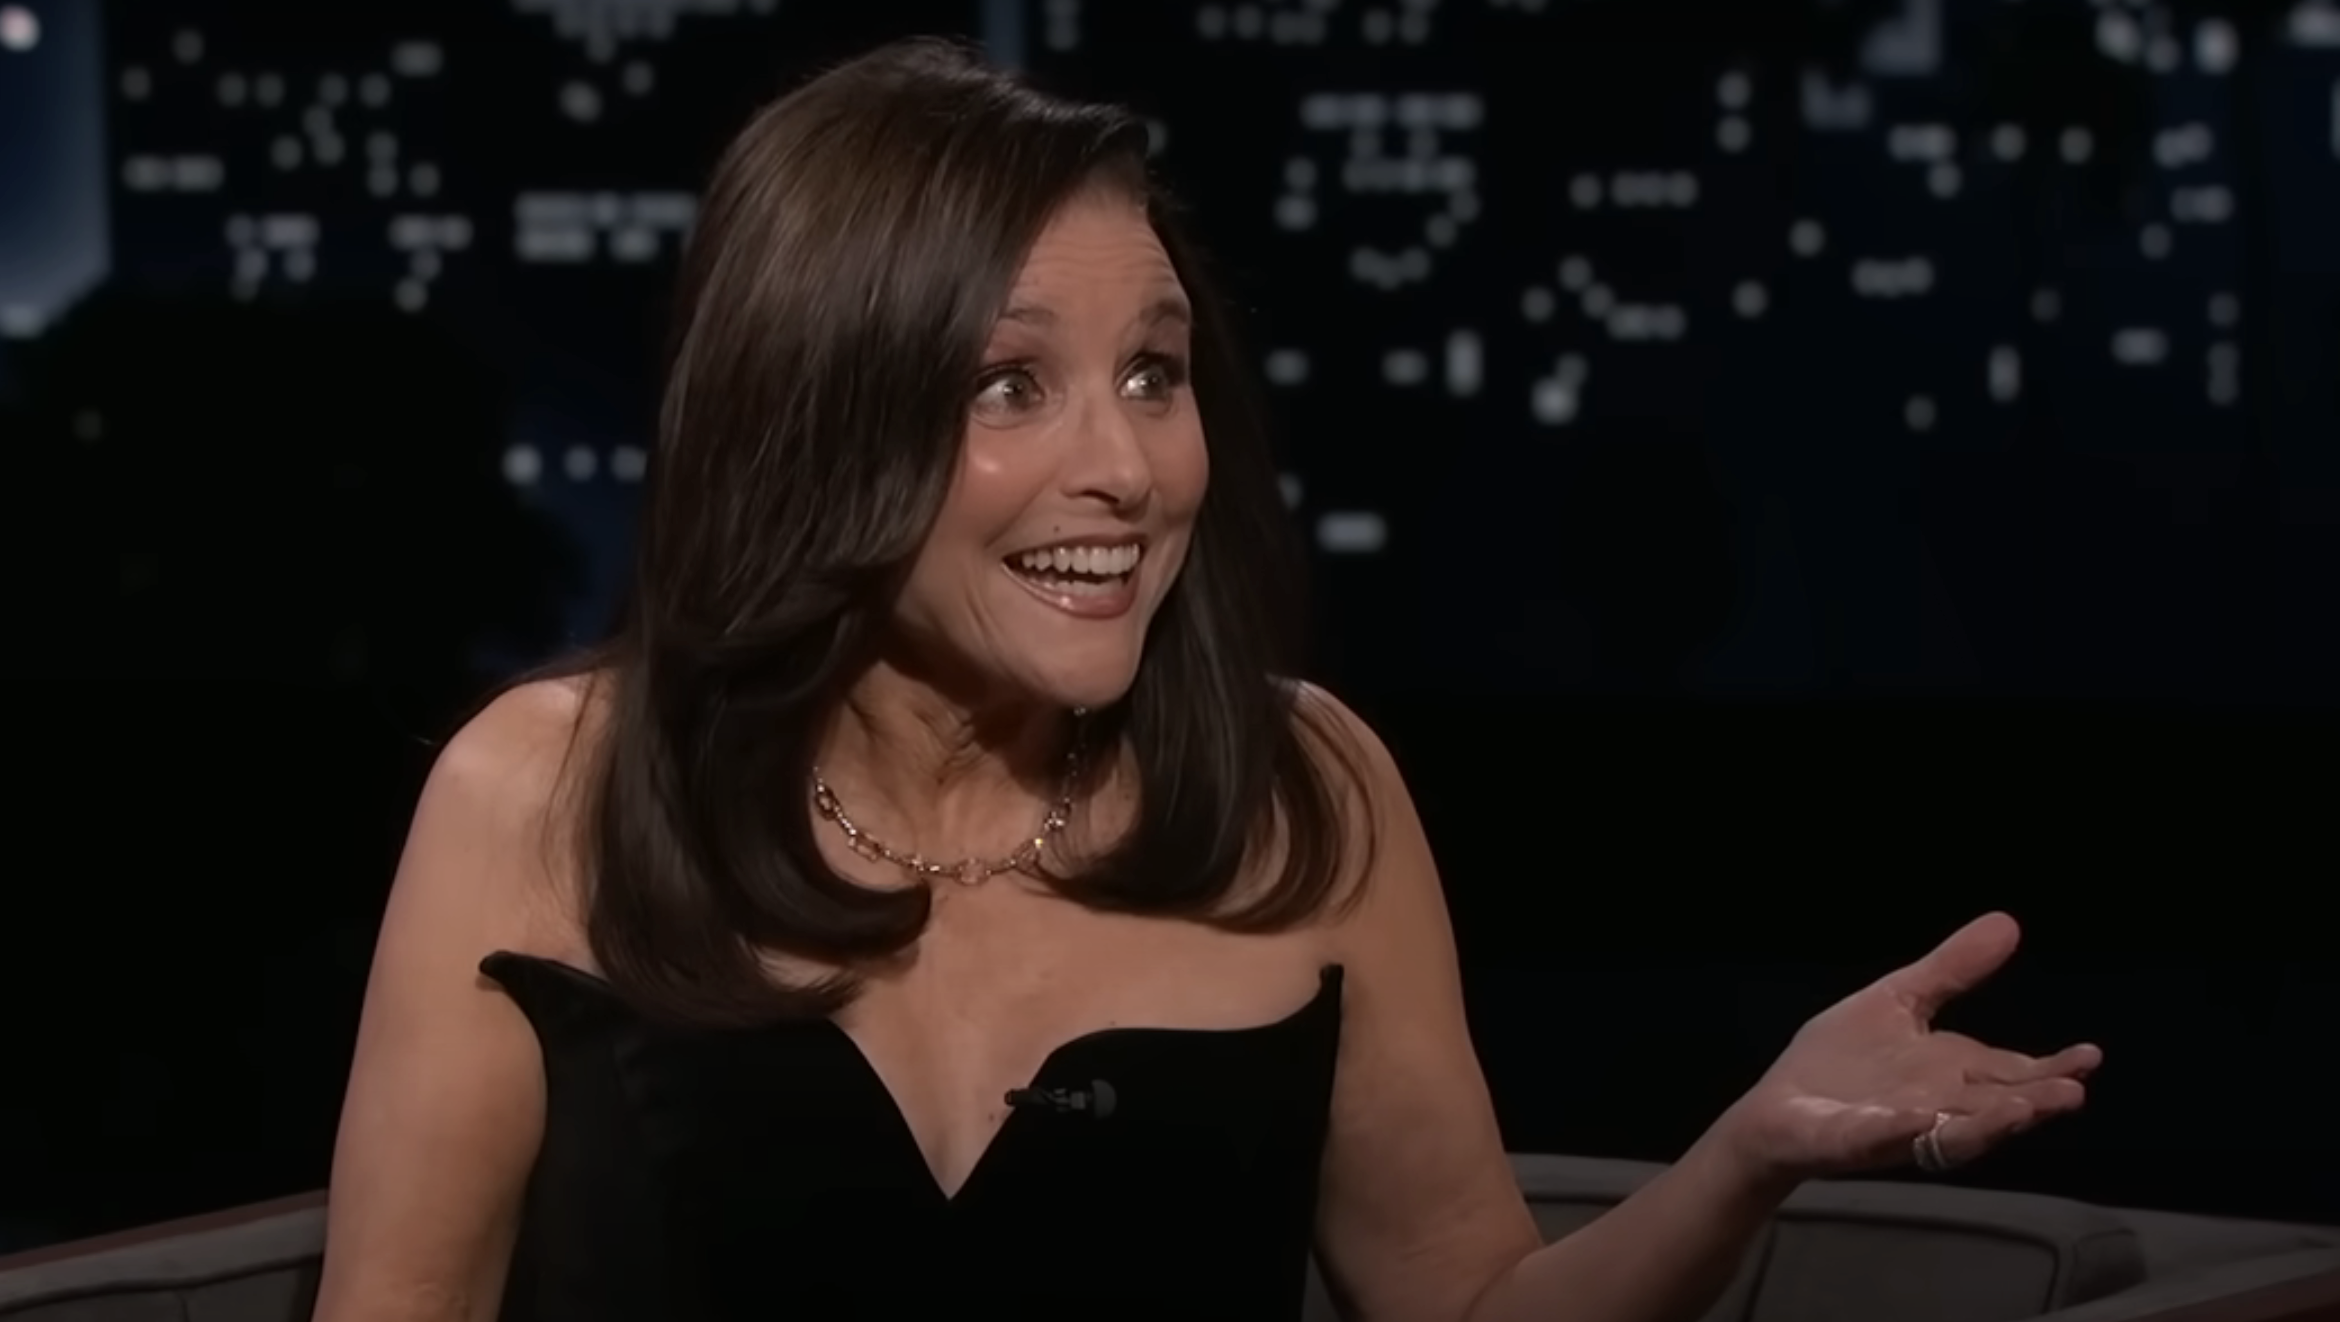 Julia Louis-Dreyfus gestures while wearing a black dress and a necklace, appearing on a talk show